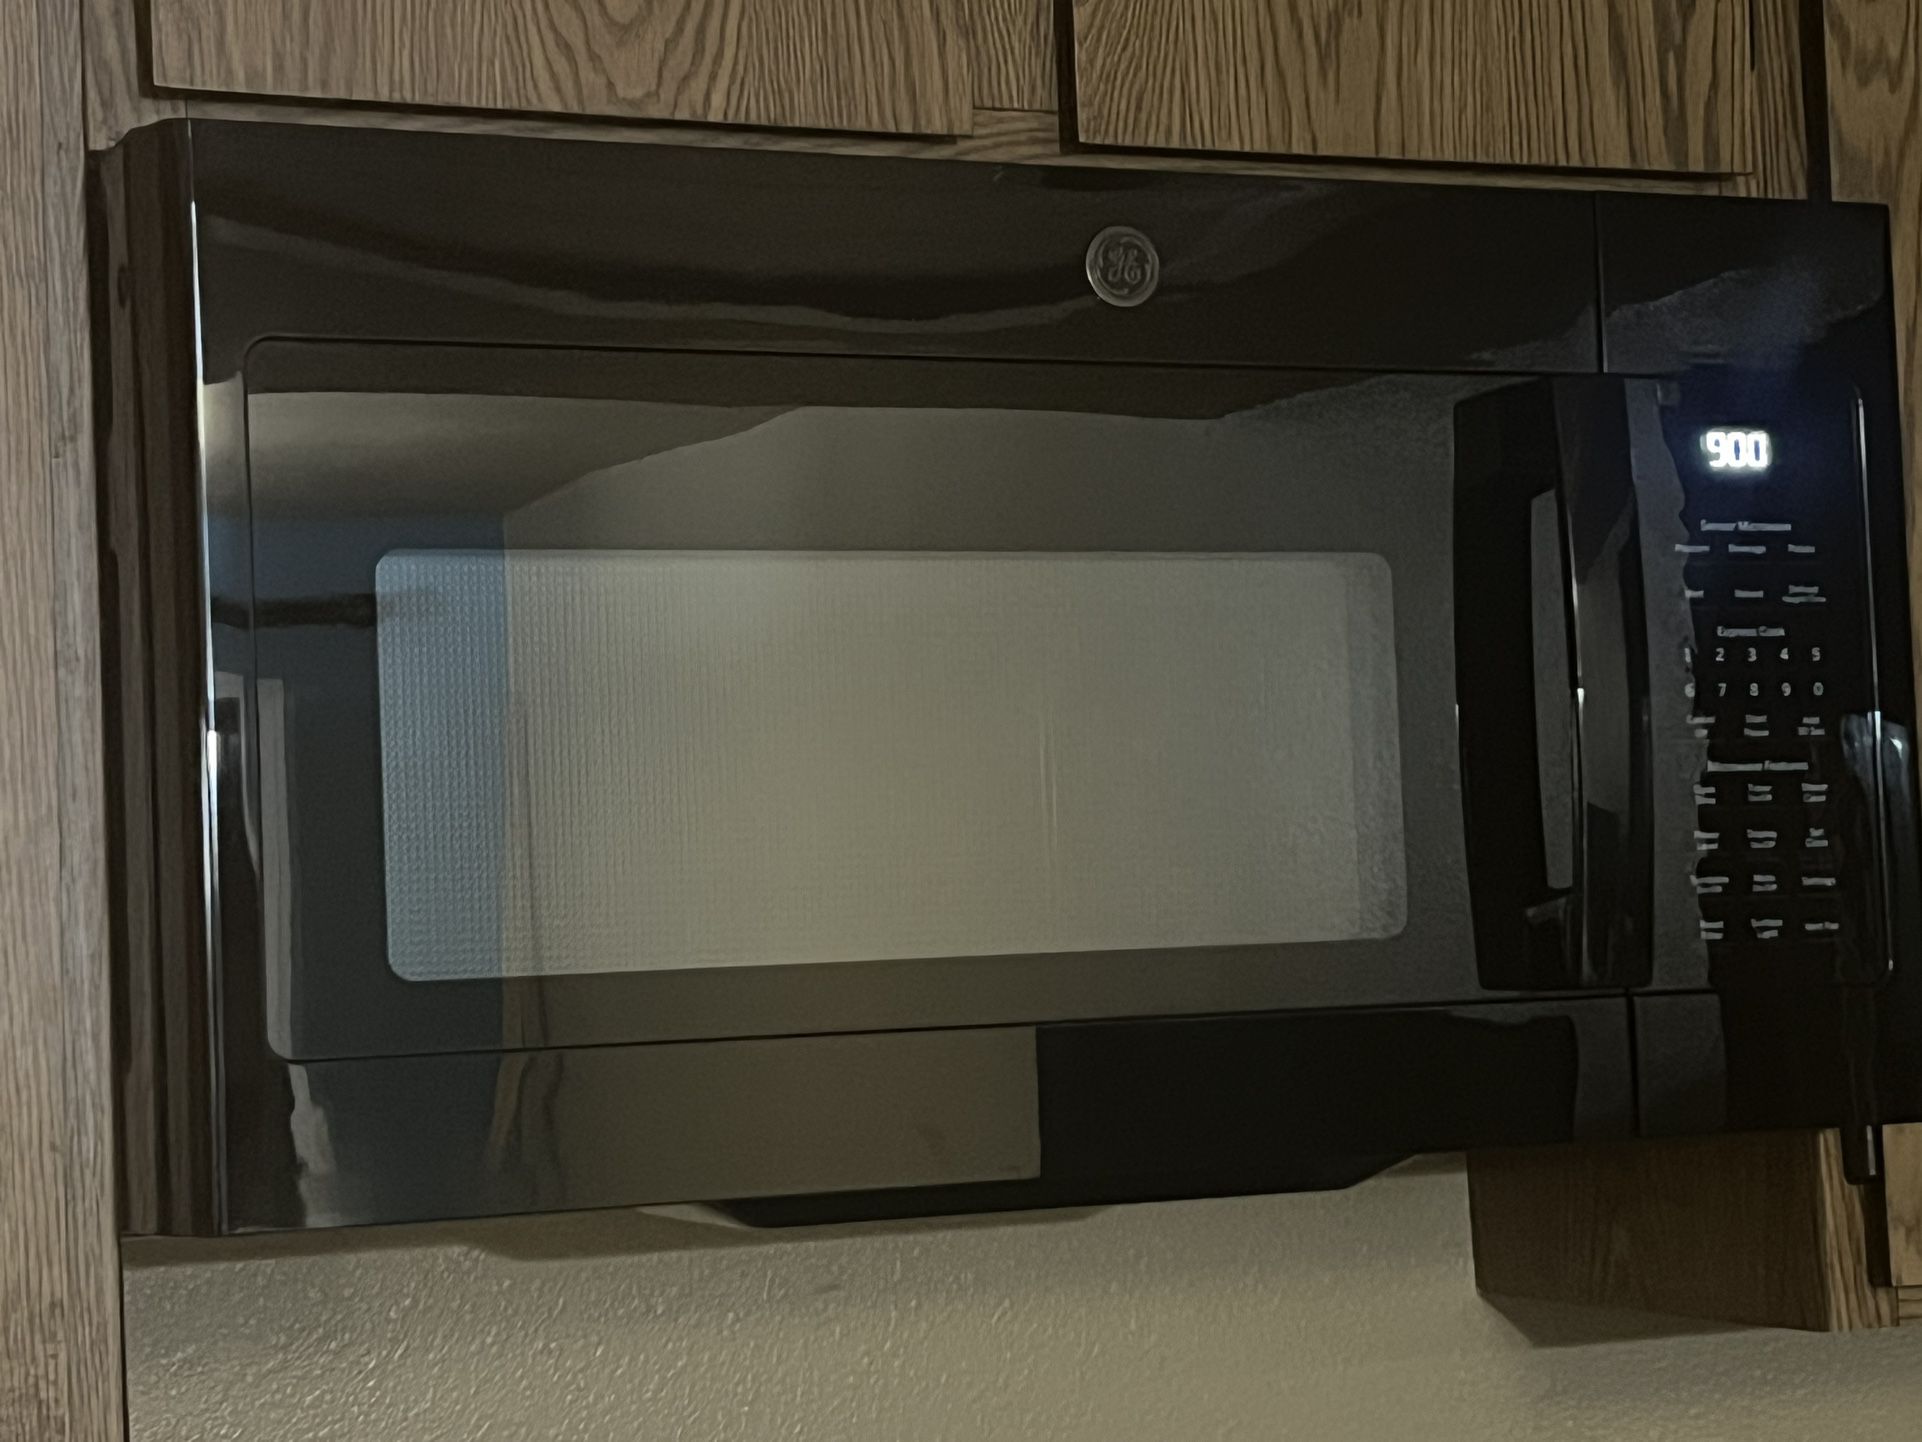 GE Microwave Above The Oven Not Counter Top